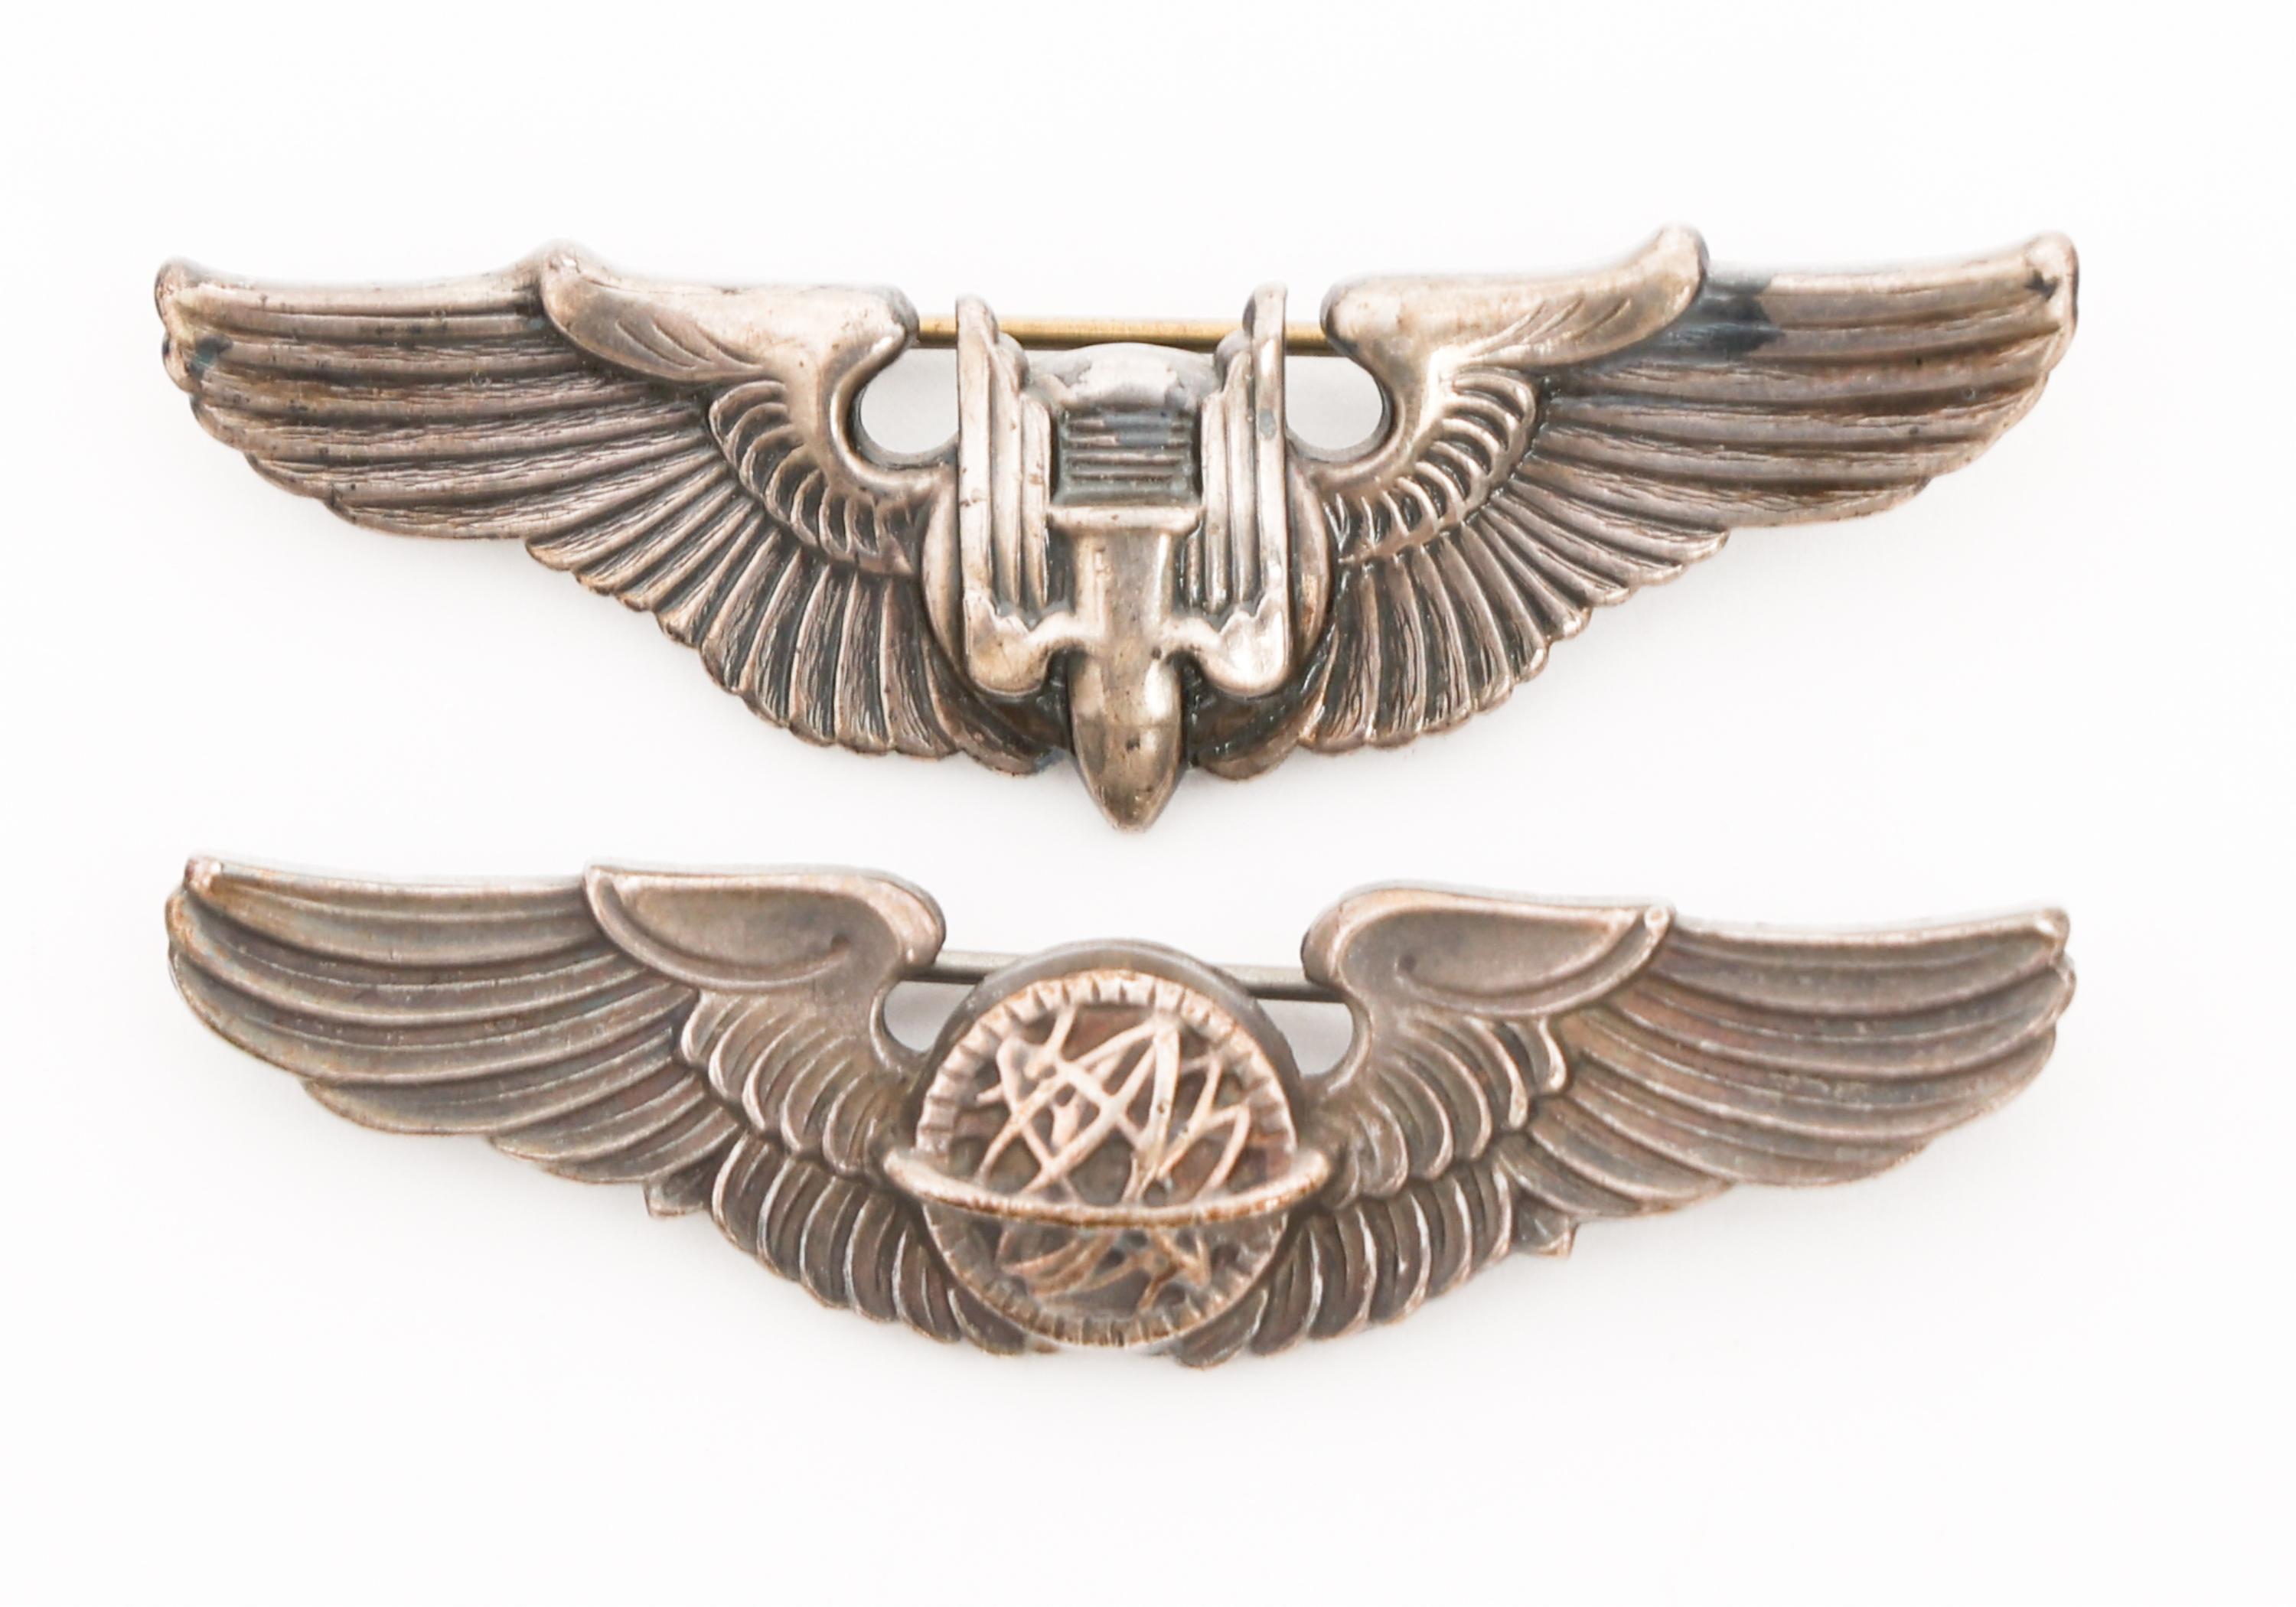 WWII US ARMY AIR FORCE QUALIFICATION WINGS